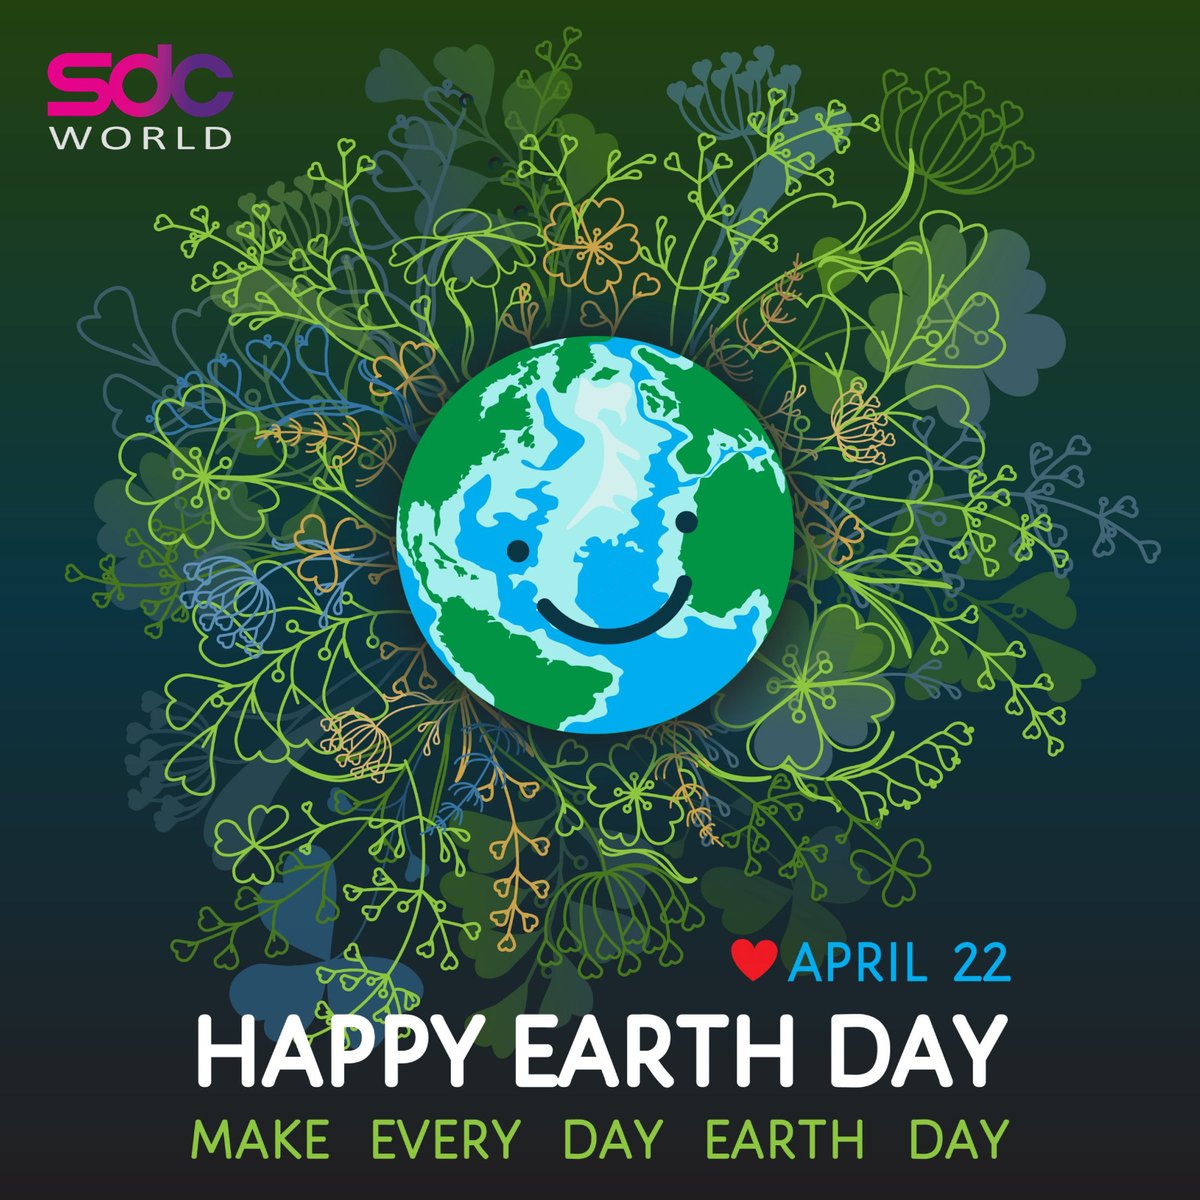 On April 22 each year, Earth Day brings people together to focus on environmental awareness and action. It serves as a poignant reminder of our collective responsibility to safeguard our planet. 

#earthday #postoftheday #internationalday #sdcworld